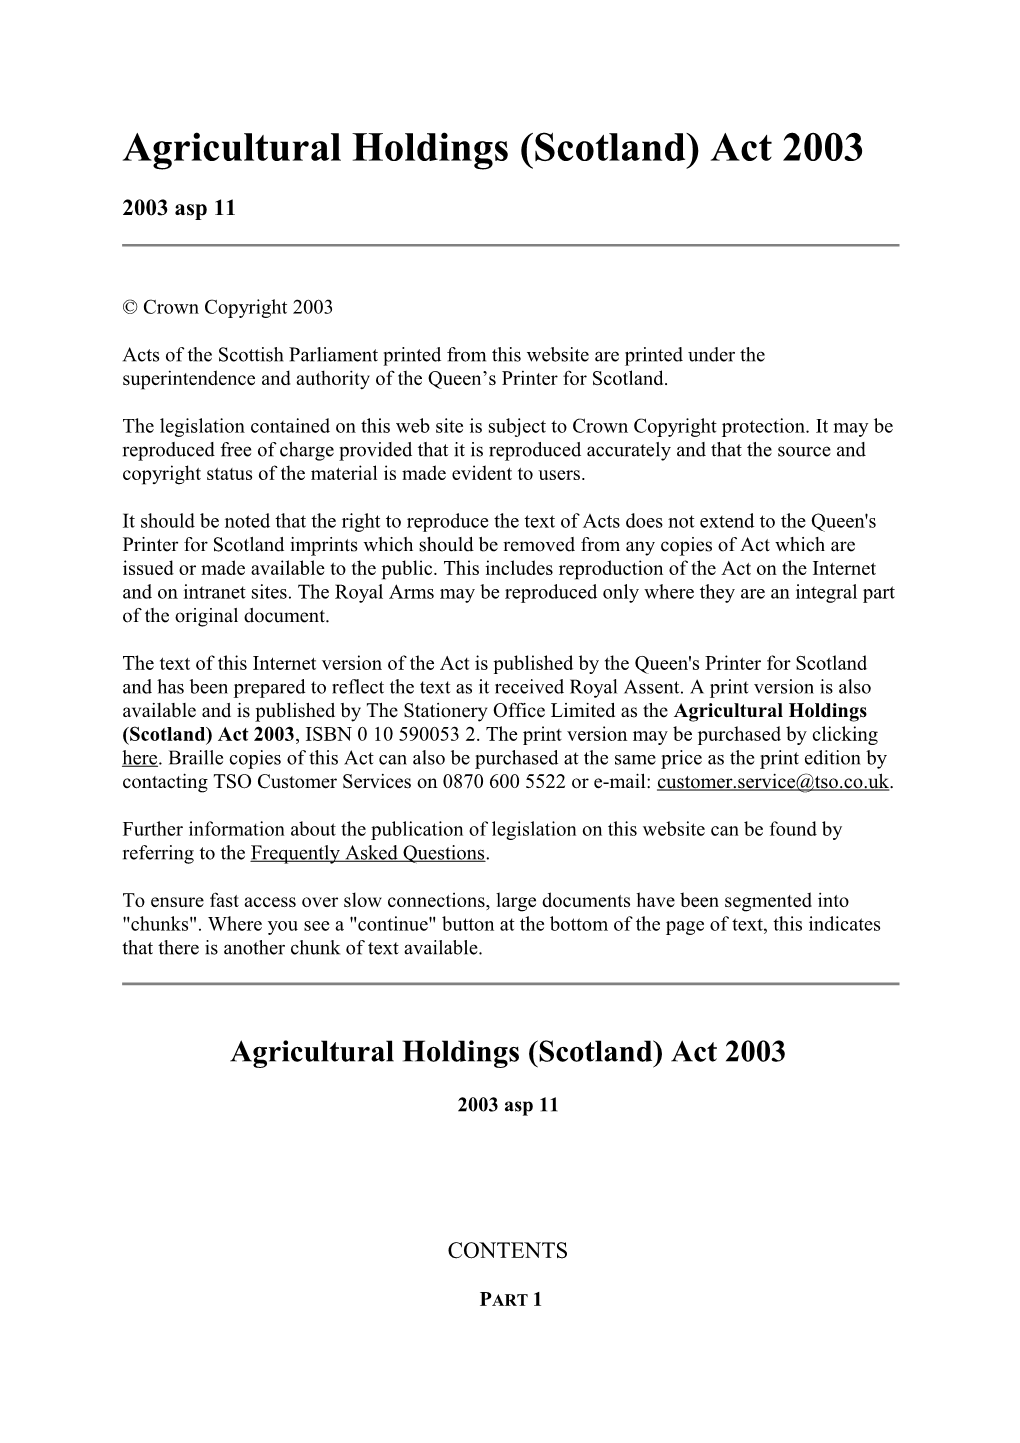 Agricultural Holdings (Scotland) Act 2003